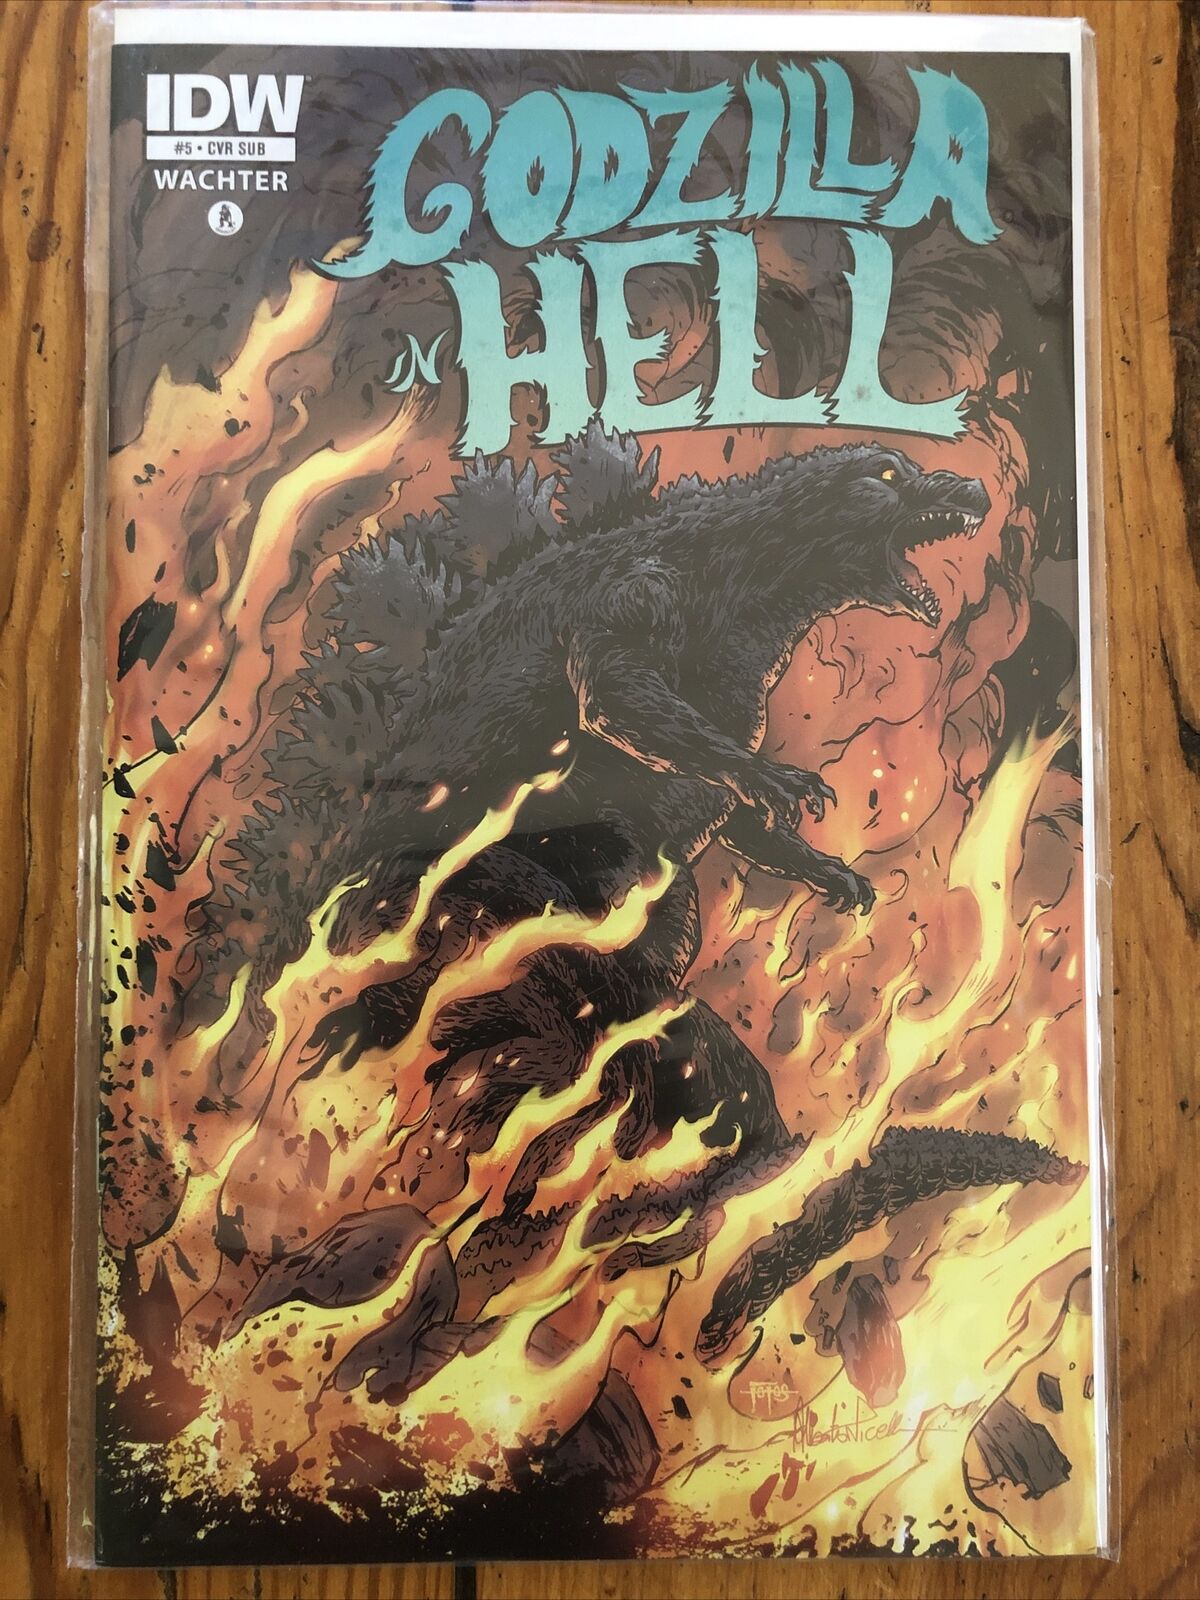 Godzilla in Hell #5 by Dave Wachter - Alberto Ponticelli SUB Variant NEW NM 